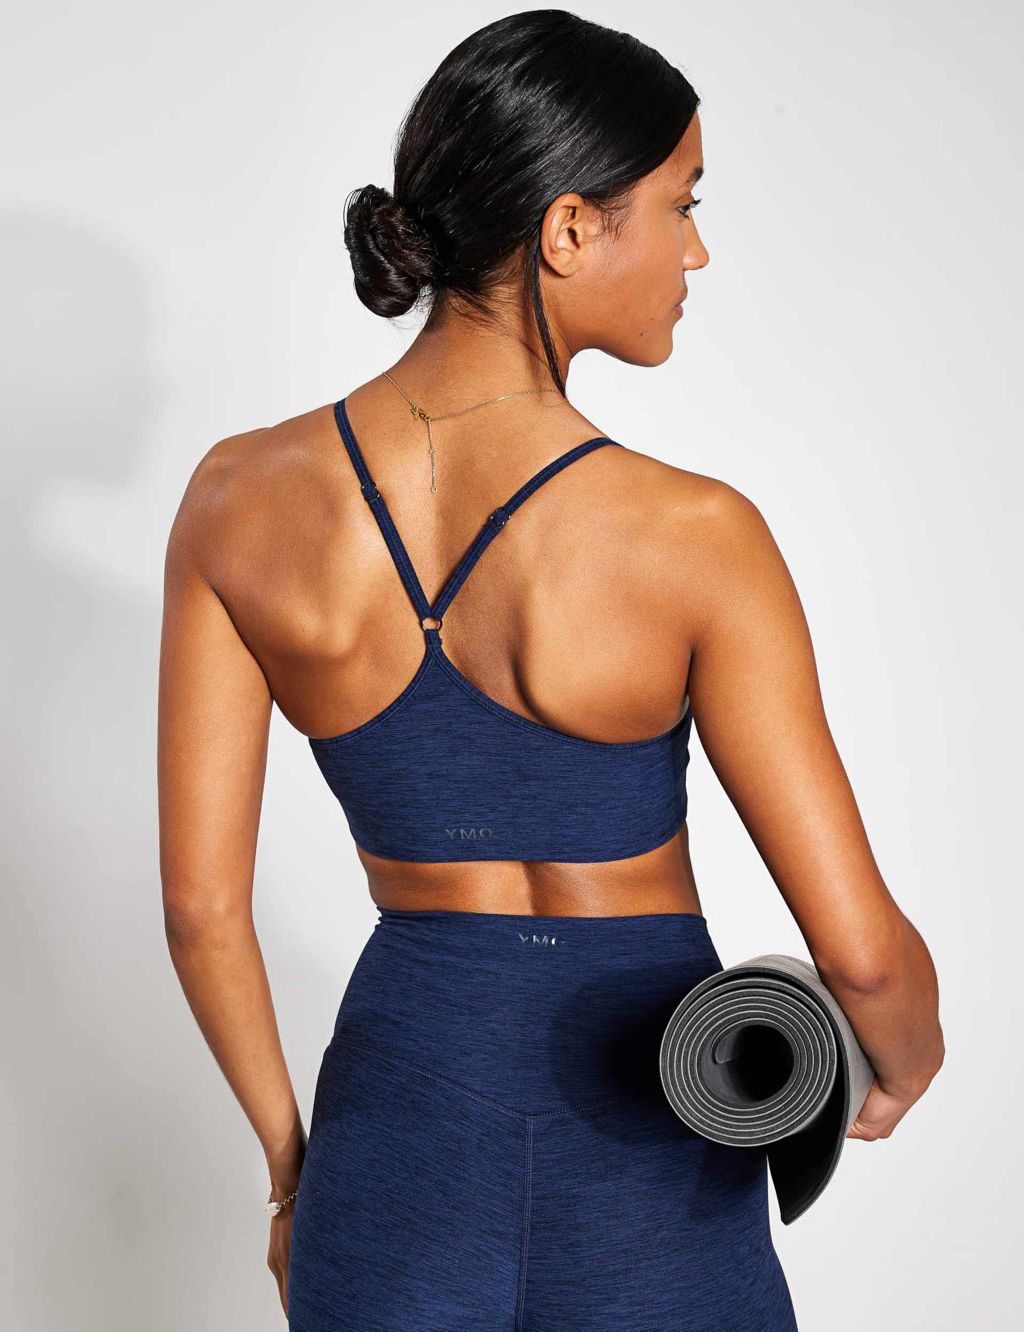 SoftLuxe Non Wired Sports Bra image 5